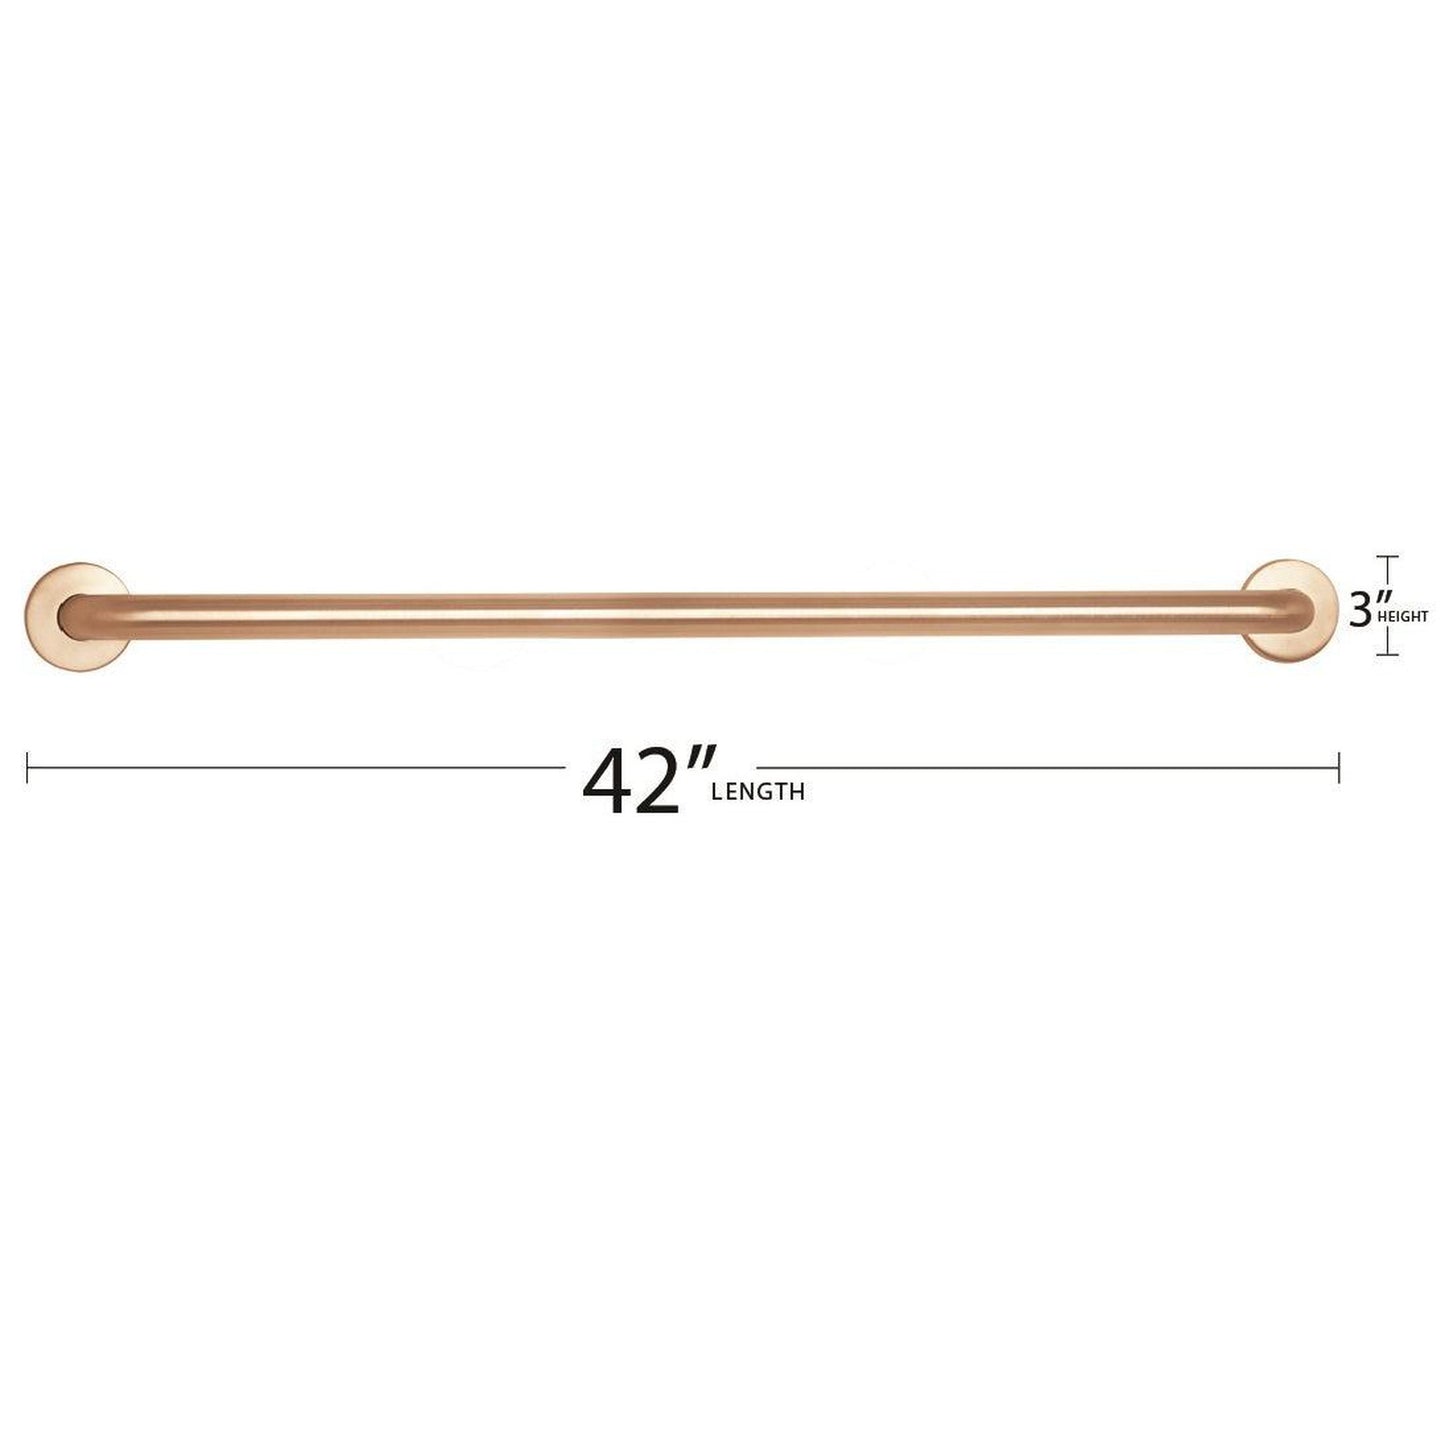 Seachrome Signature Series CuVerro 42" Antimicrobial Copper Alloy 1.5" Bar Diameter Concealed Flange Straight Grab Bar